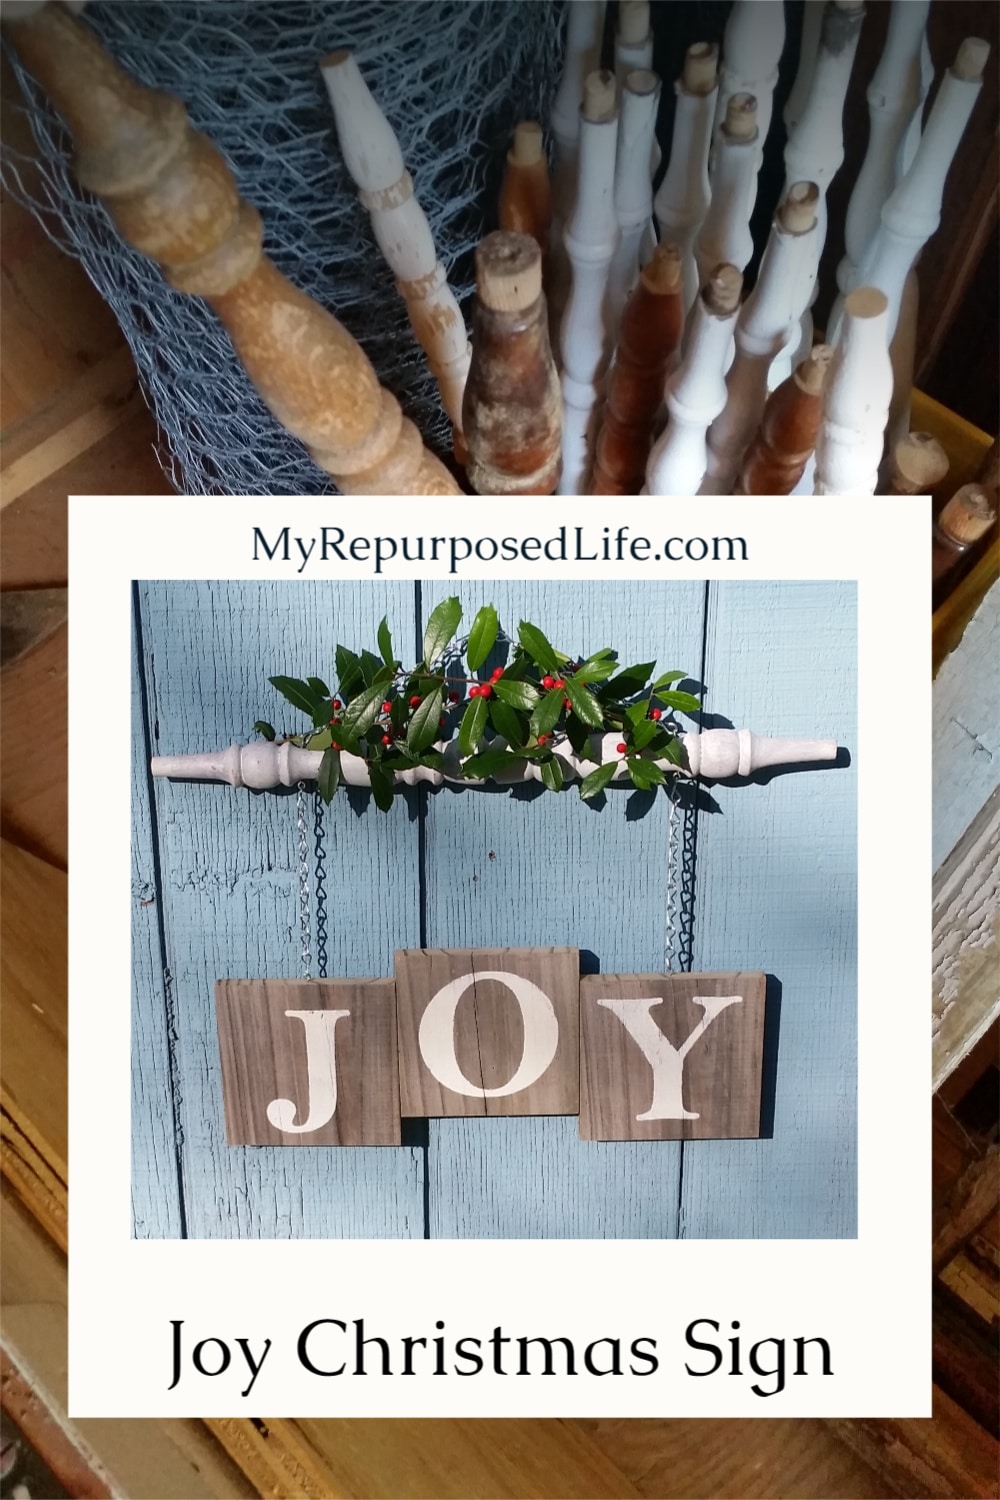 How to make a Joy wooden spindle sign for Christmas. An old spindle and reclaimed fence are the perfect combination for rustic Christmas Decor Joy Sign. #MyRepurposedLife #repurposed #spindle #joy #sign #Christmas #decor via @repurposedlife